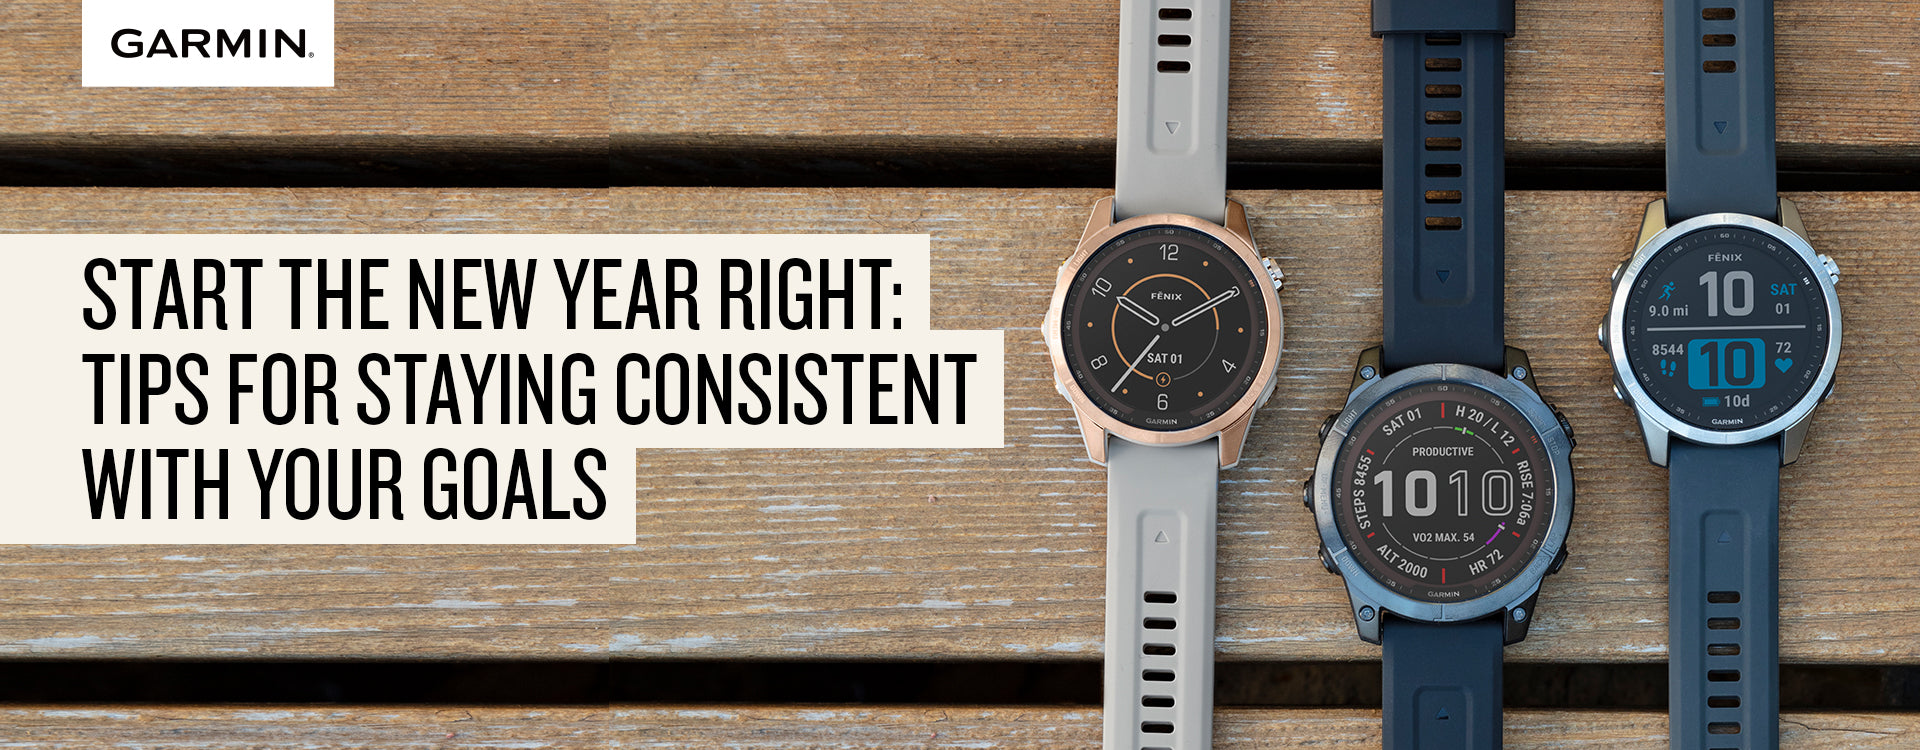 Start the New Year Right: Tips for Staying Consistent with Your Goals